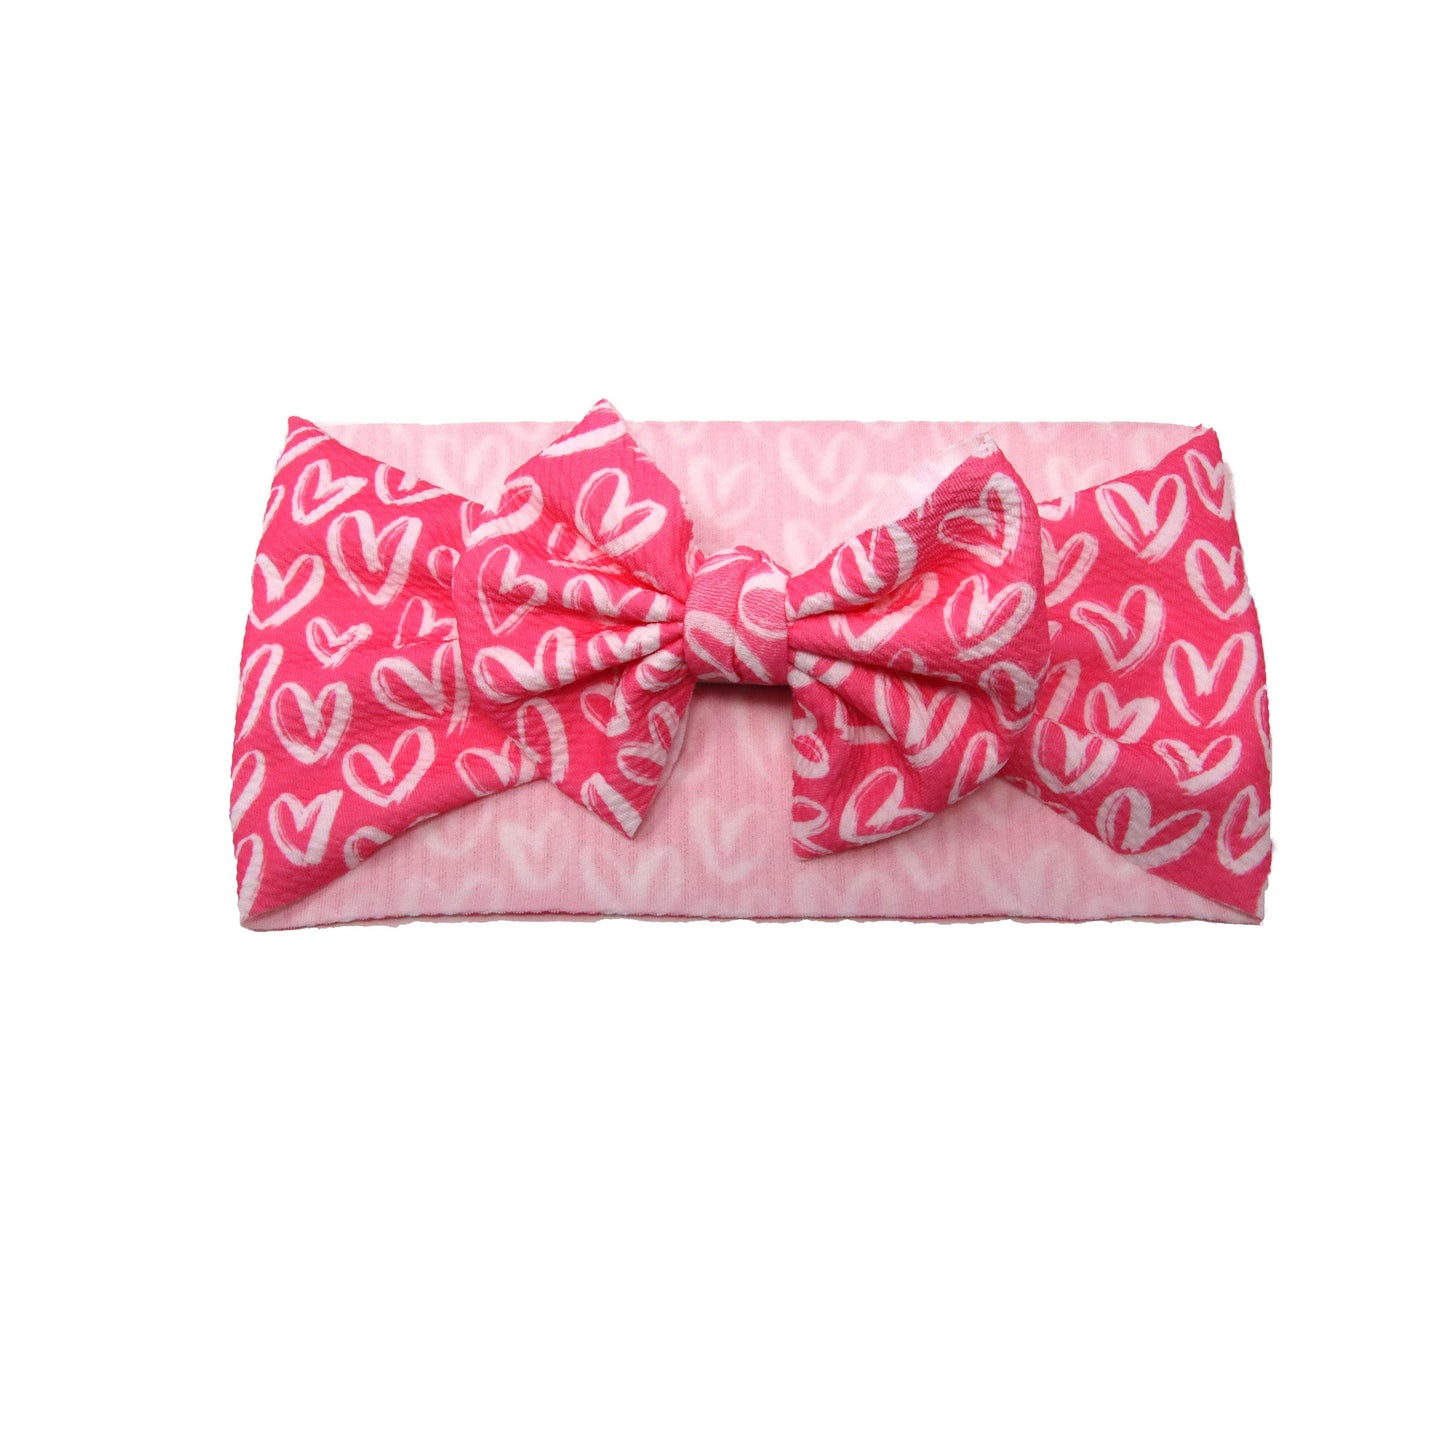 5 inch White Hearts on Pink Fabric Bow Headwrap